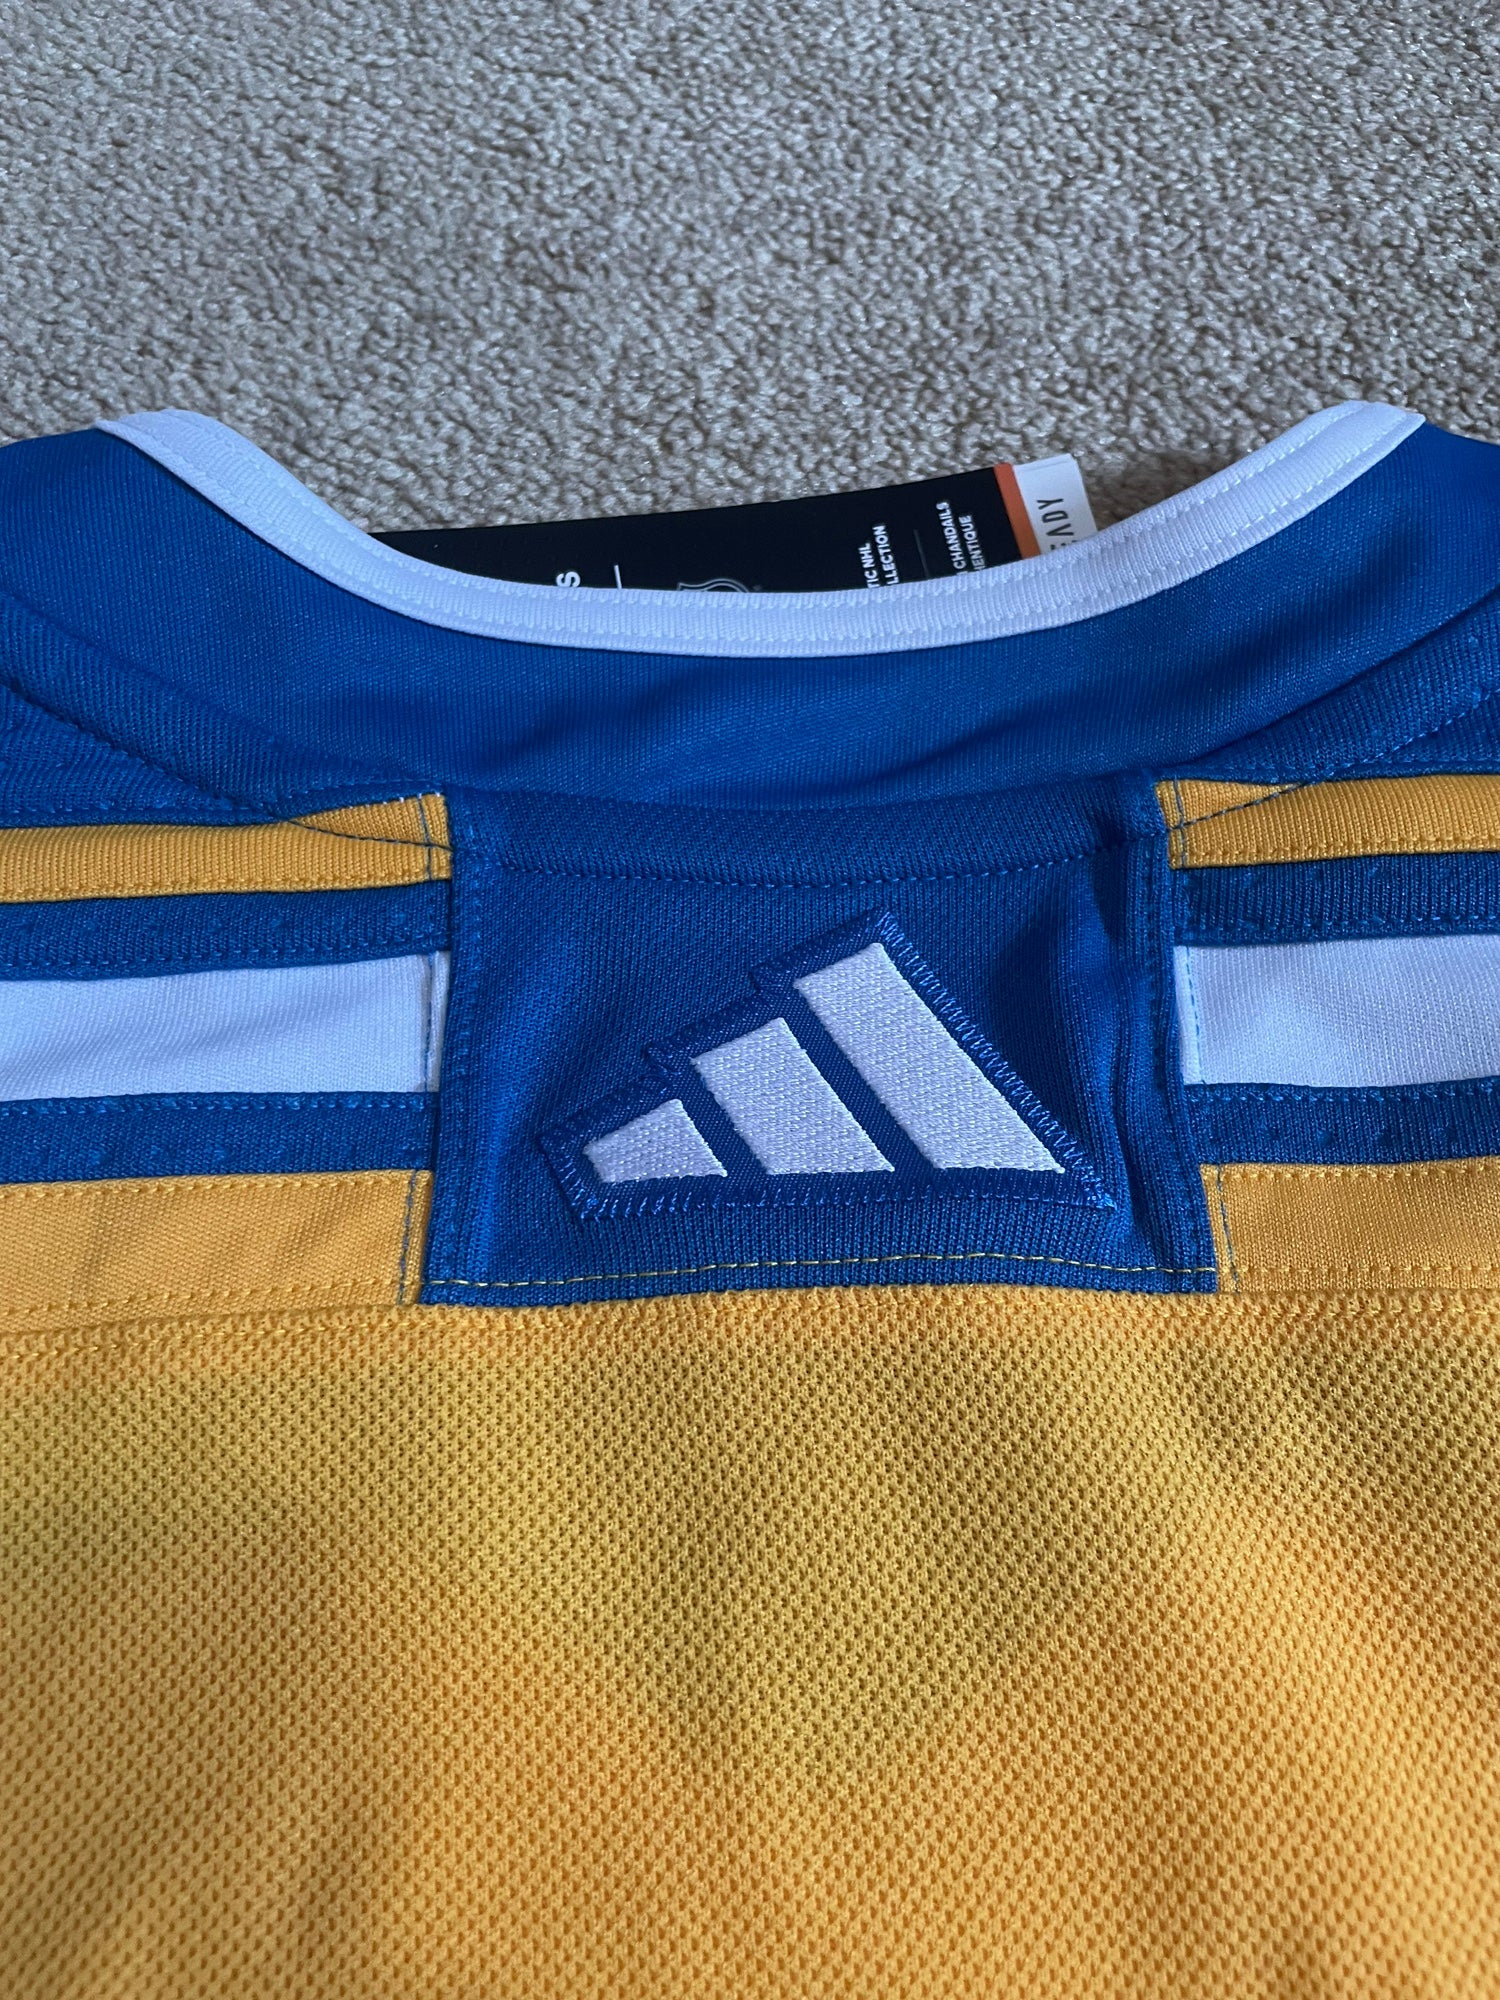 St. Louis Blues Adidas Authentic Home NHL Hockey Jersey - S